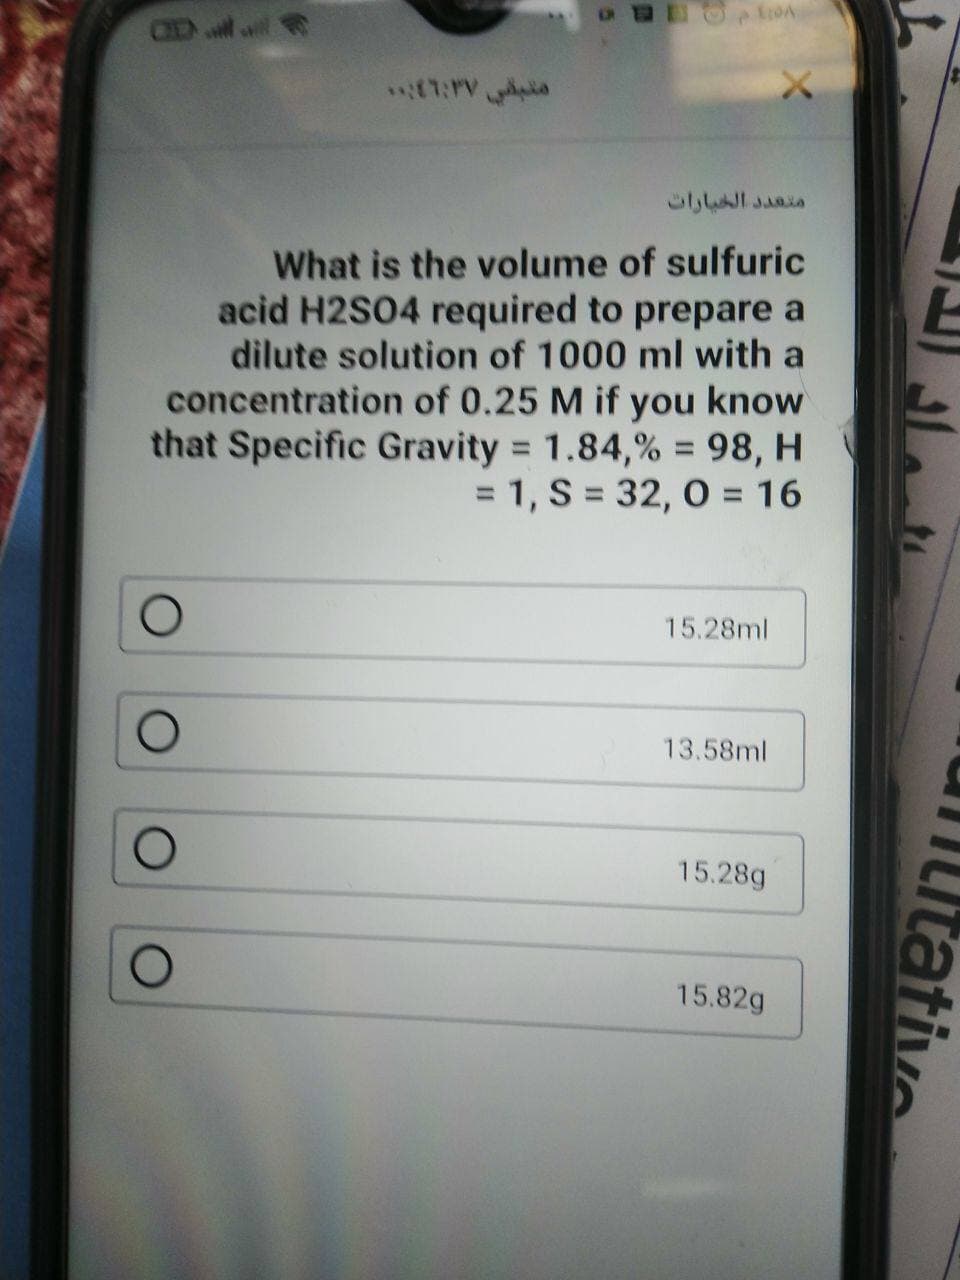 CH
What is the volume of sulfuric
acid H2S04 required to prepare a
dilute solution of 1000 ml with a
concentration of 0.25 M if you know
that Specific Gravity = 1.84,% = 98, H
= 1, S = 32, 0 = 16
%3D
%3D
15.28ml
13.58ml
15.28g
15.82g
Itative
